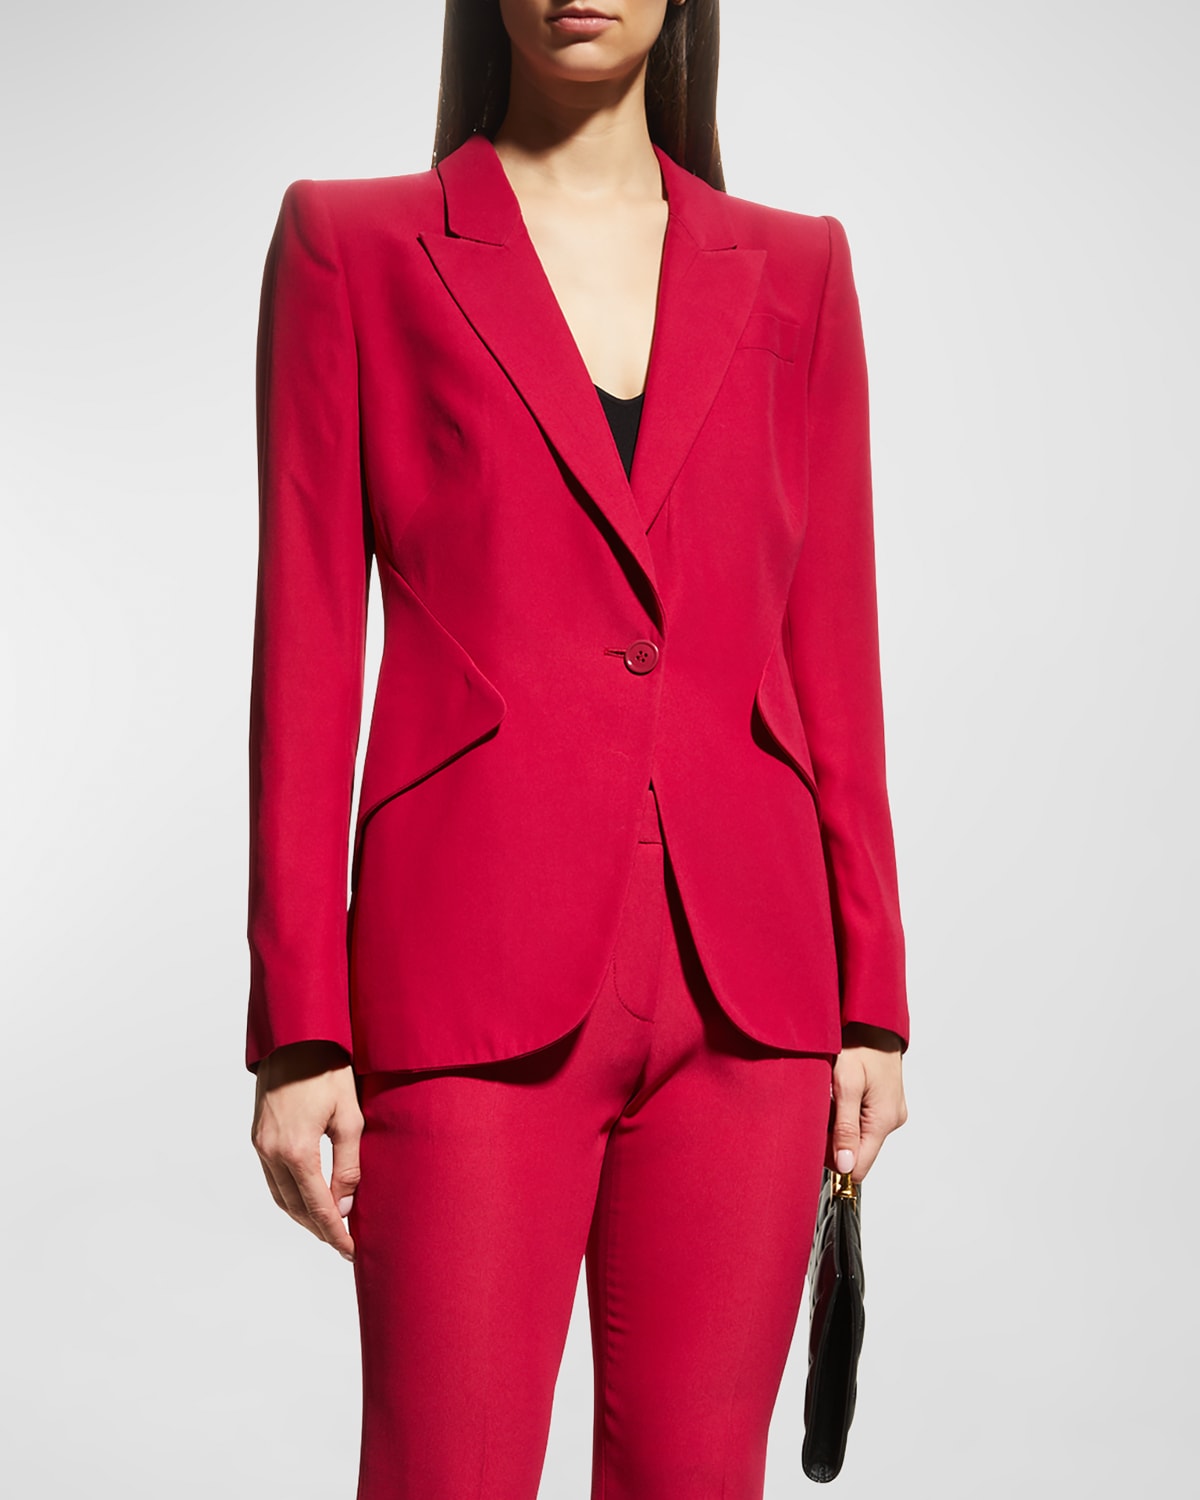 Alexander McQueen Classic Single-Breasted Suiting Blazer